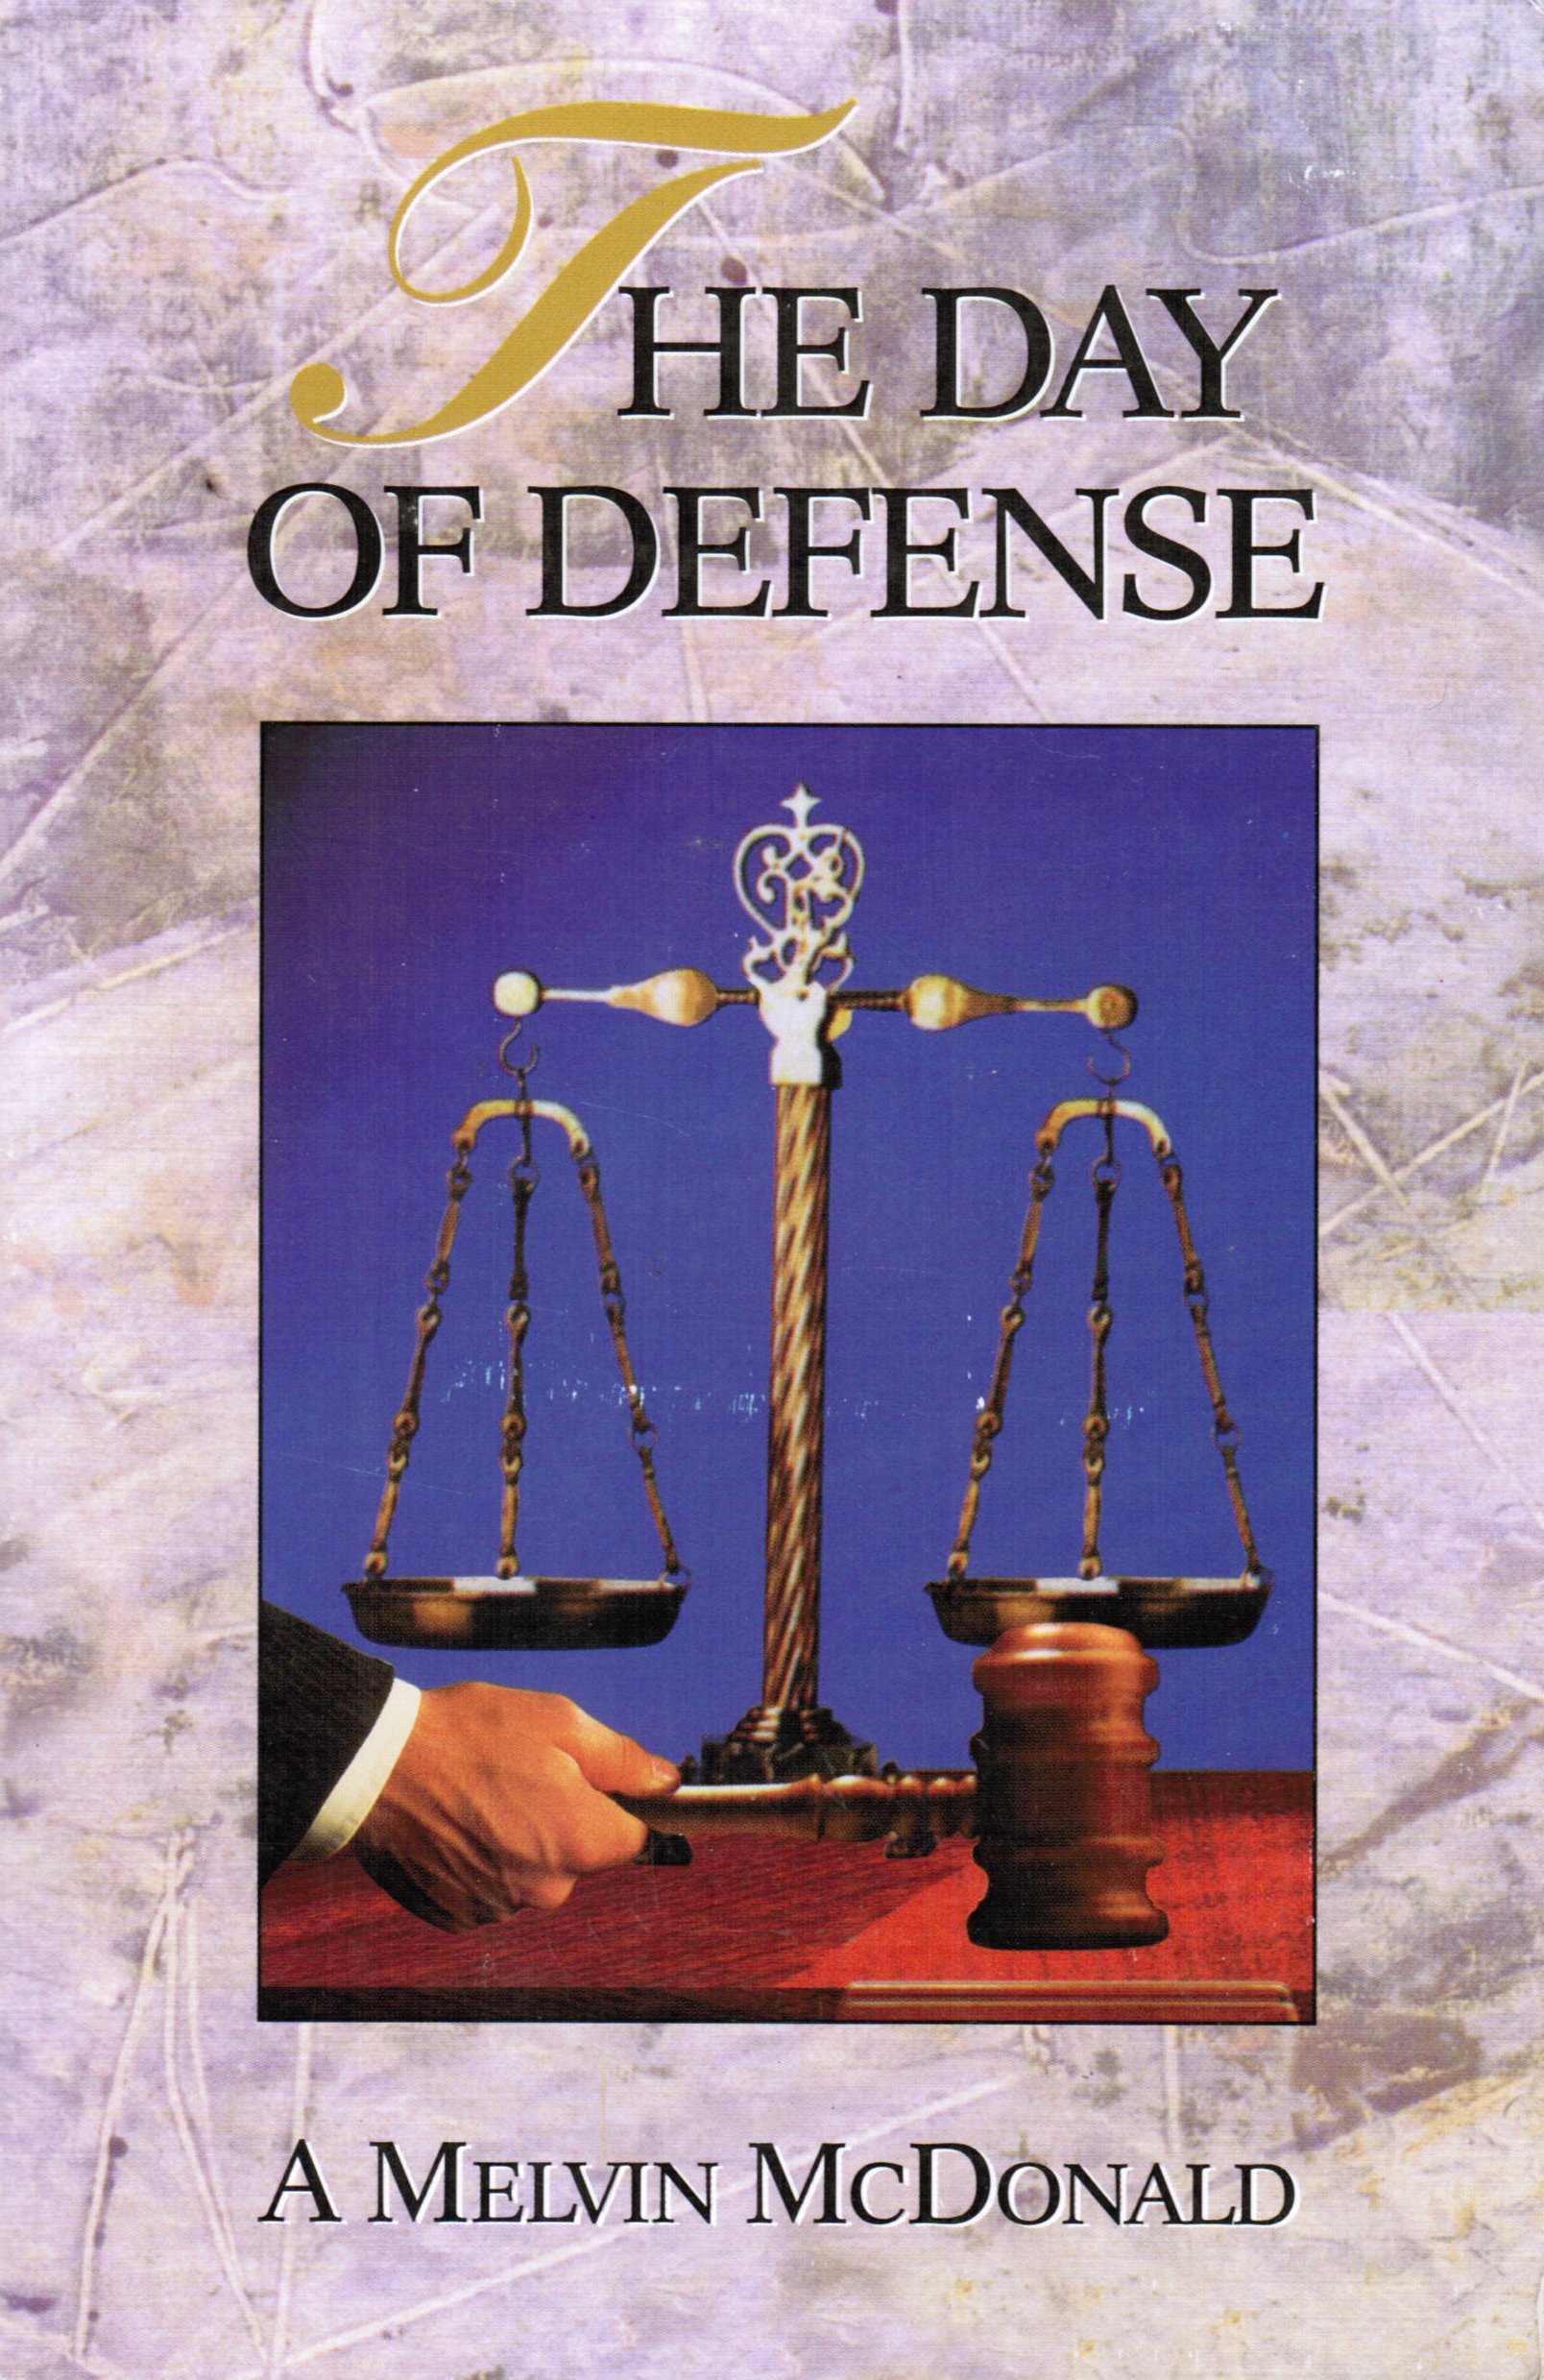 in defense of truth lds pdf free download